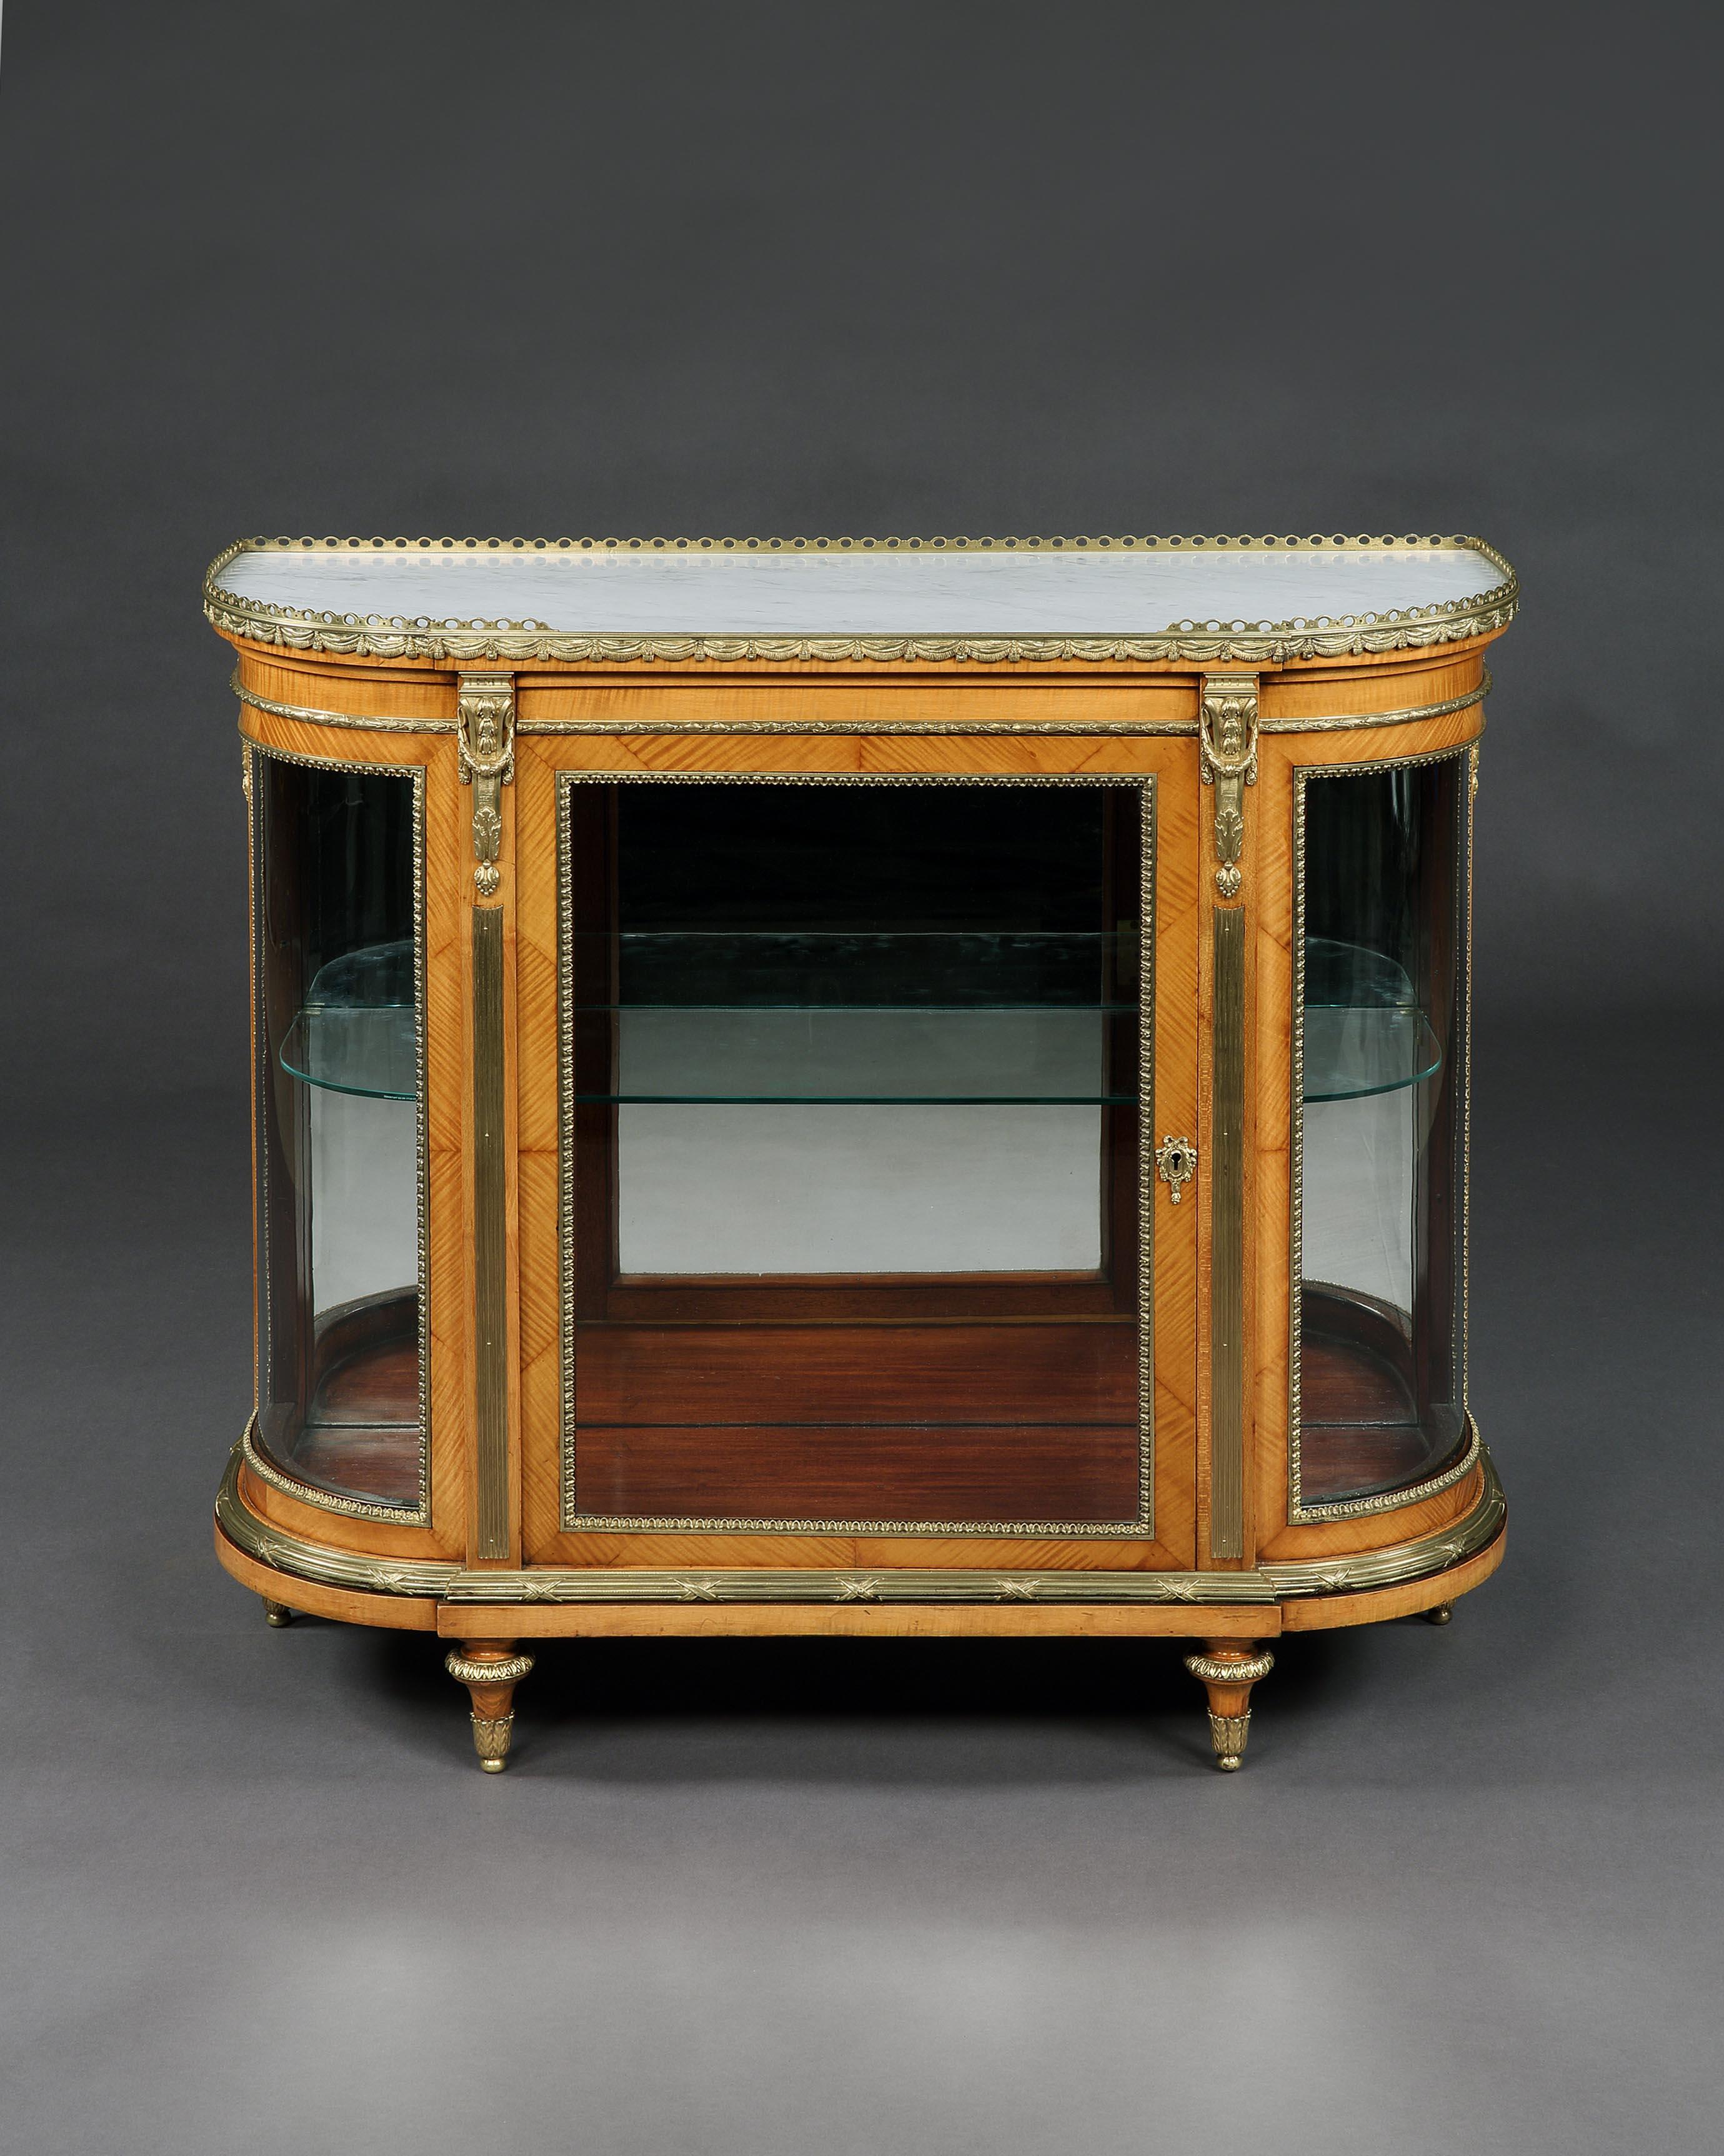 A pair of display cabinets
By C. Mellier & Co.

Constructed in fine satin birch, the demi-lune display cabinets having a gentle breakfront form, and rising from toupie feet, the glazed facets enclosed within ormolu stiff leaf moulding, the